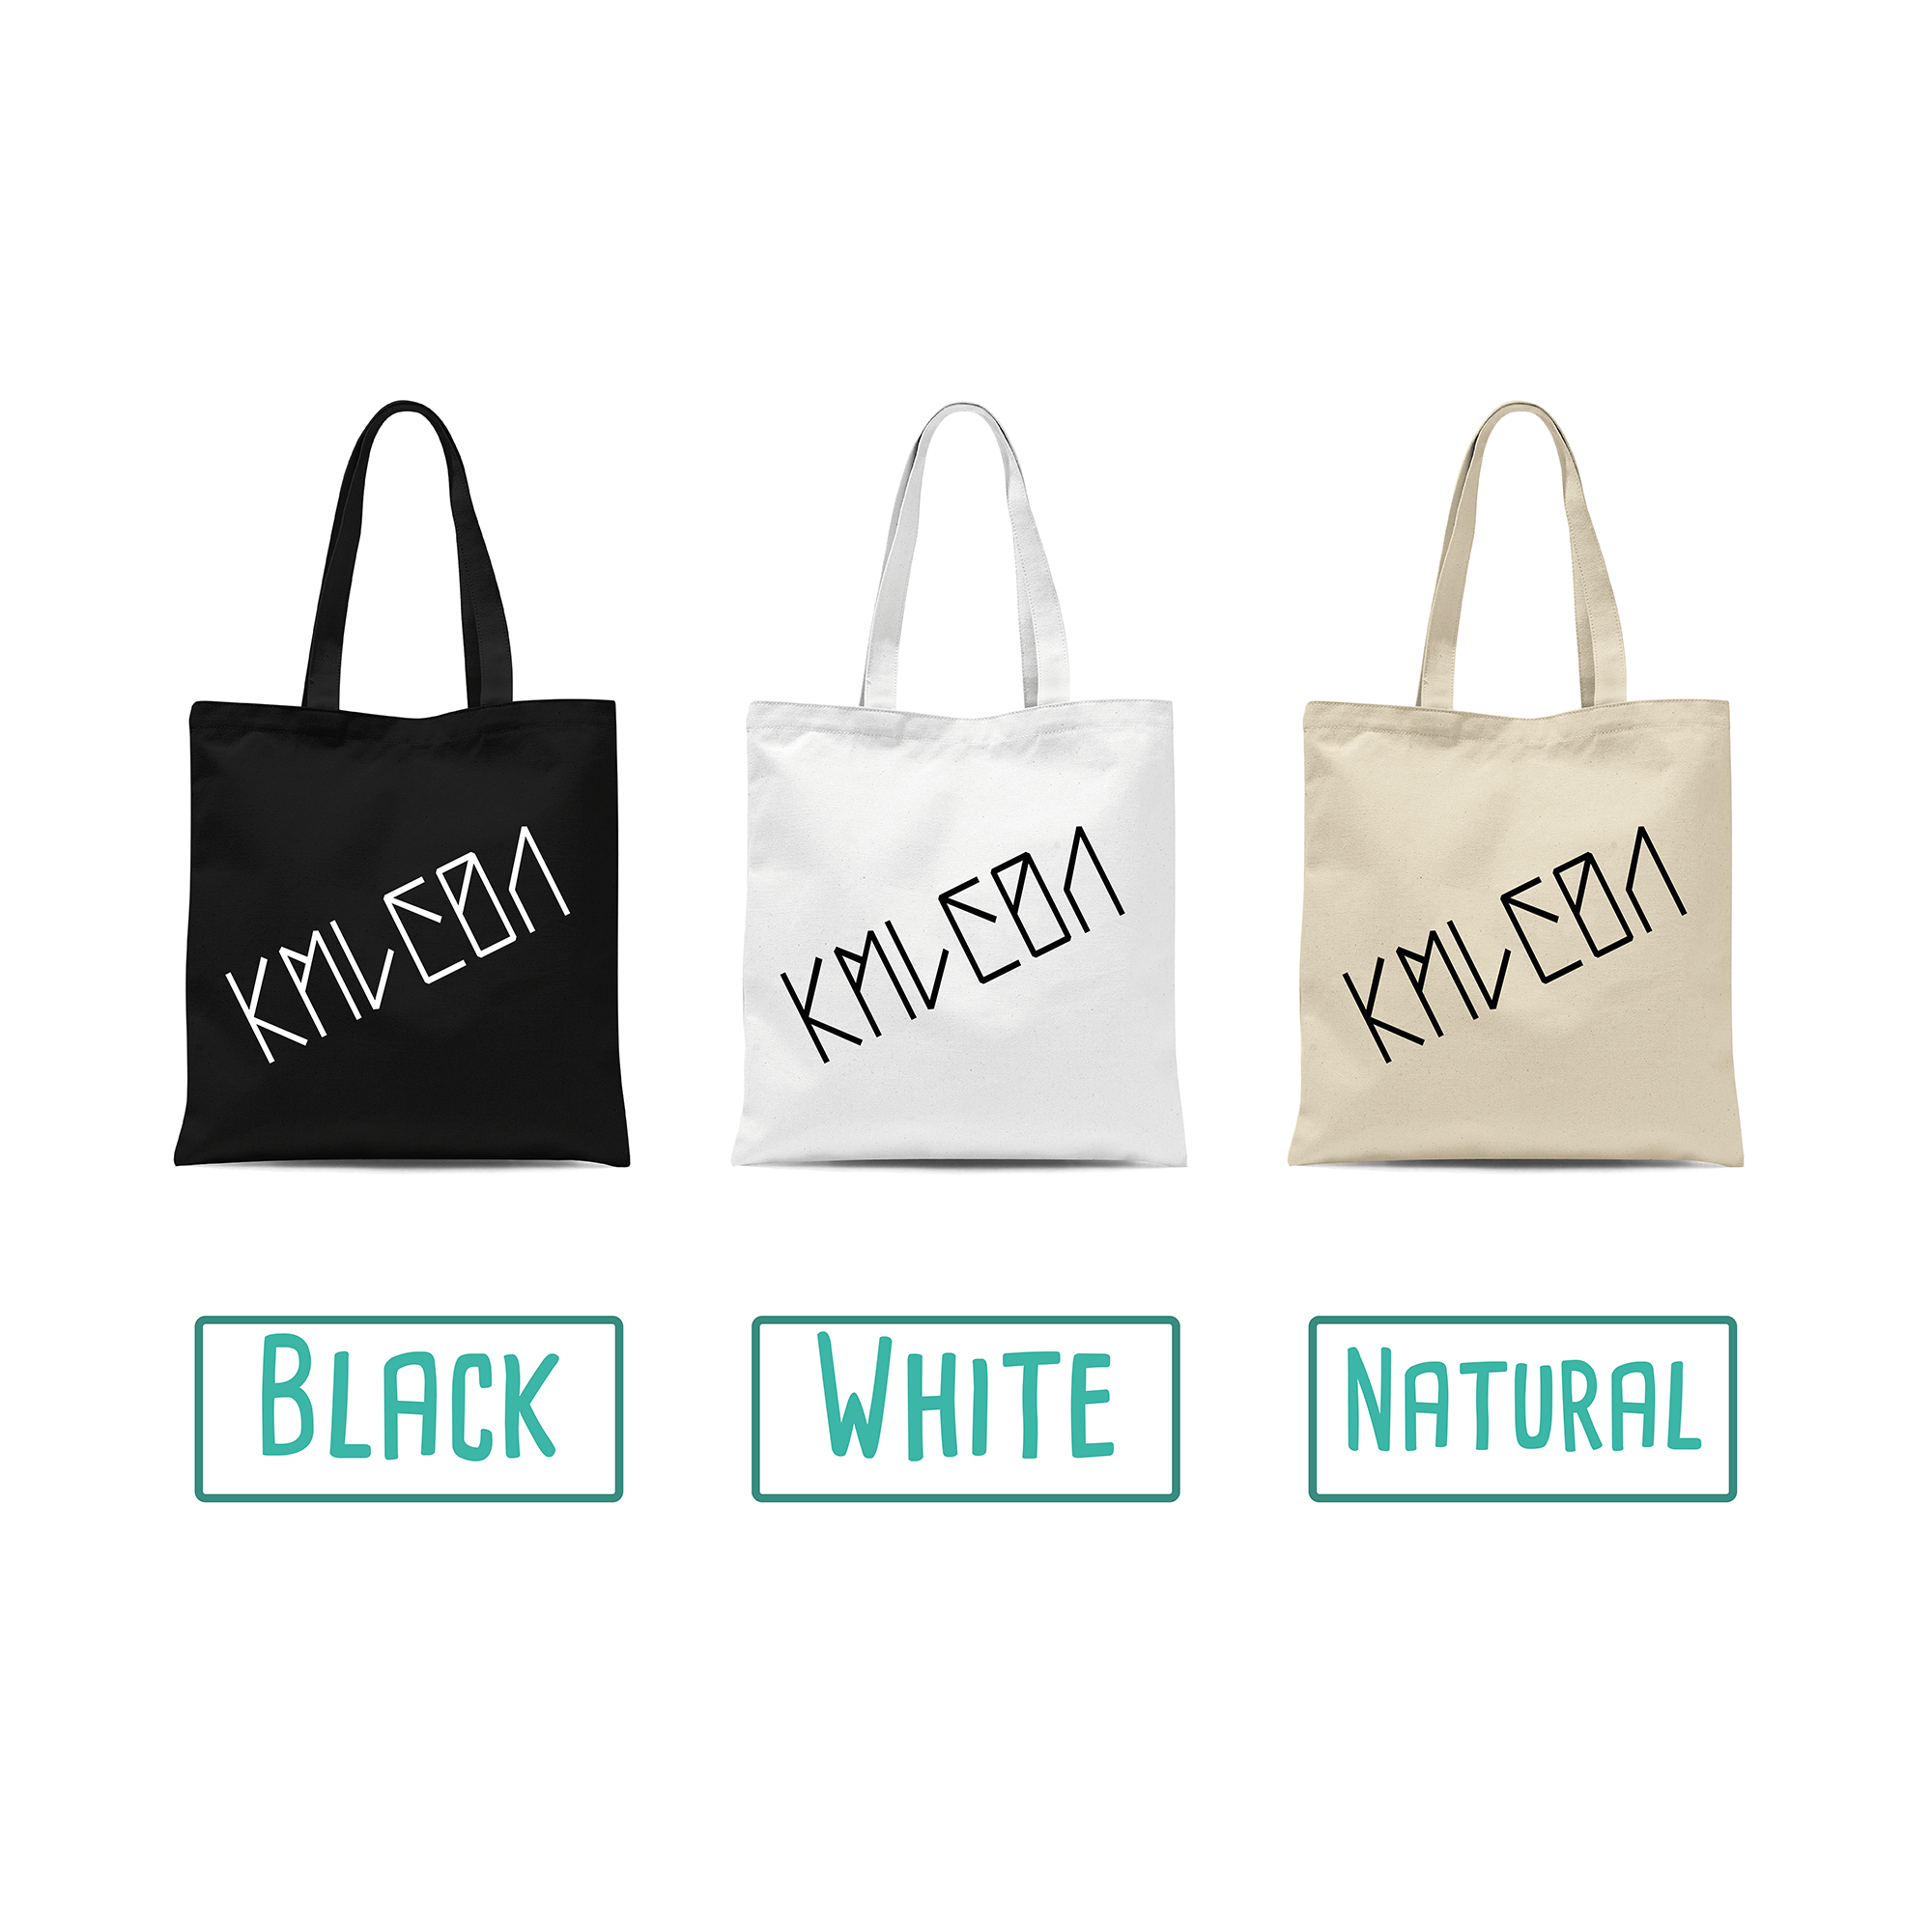 'Nothing to wear' tote bag